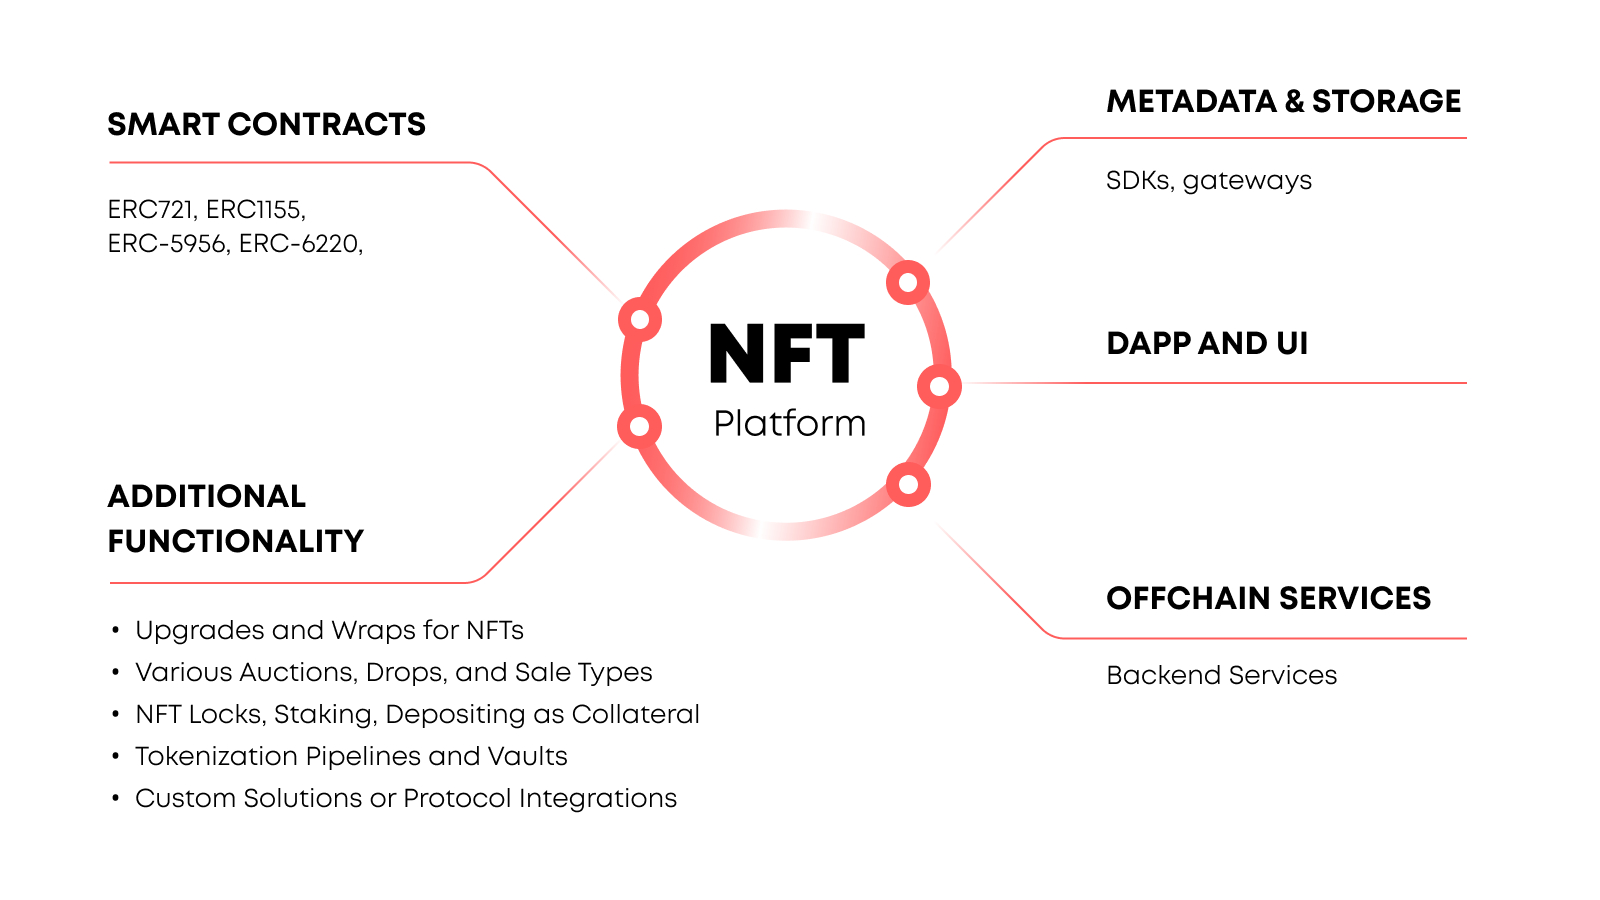 NFT platforms exhibit diverse specializations, including marketplaces, tokenization platforms, RWA protocols, simple minting pages, and sophisticated digital art auctions.